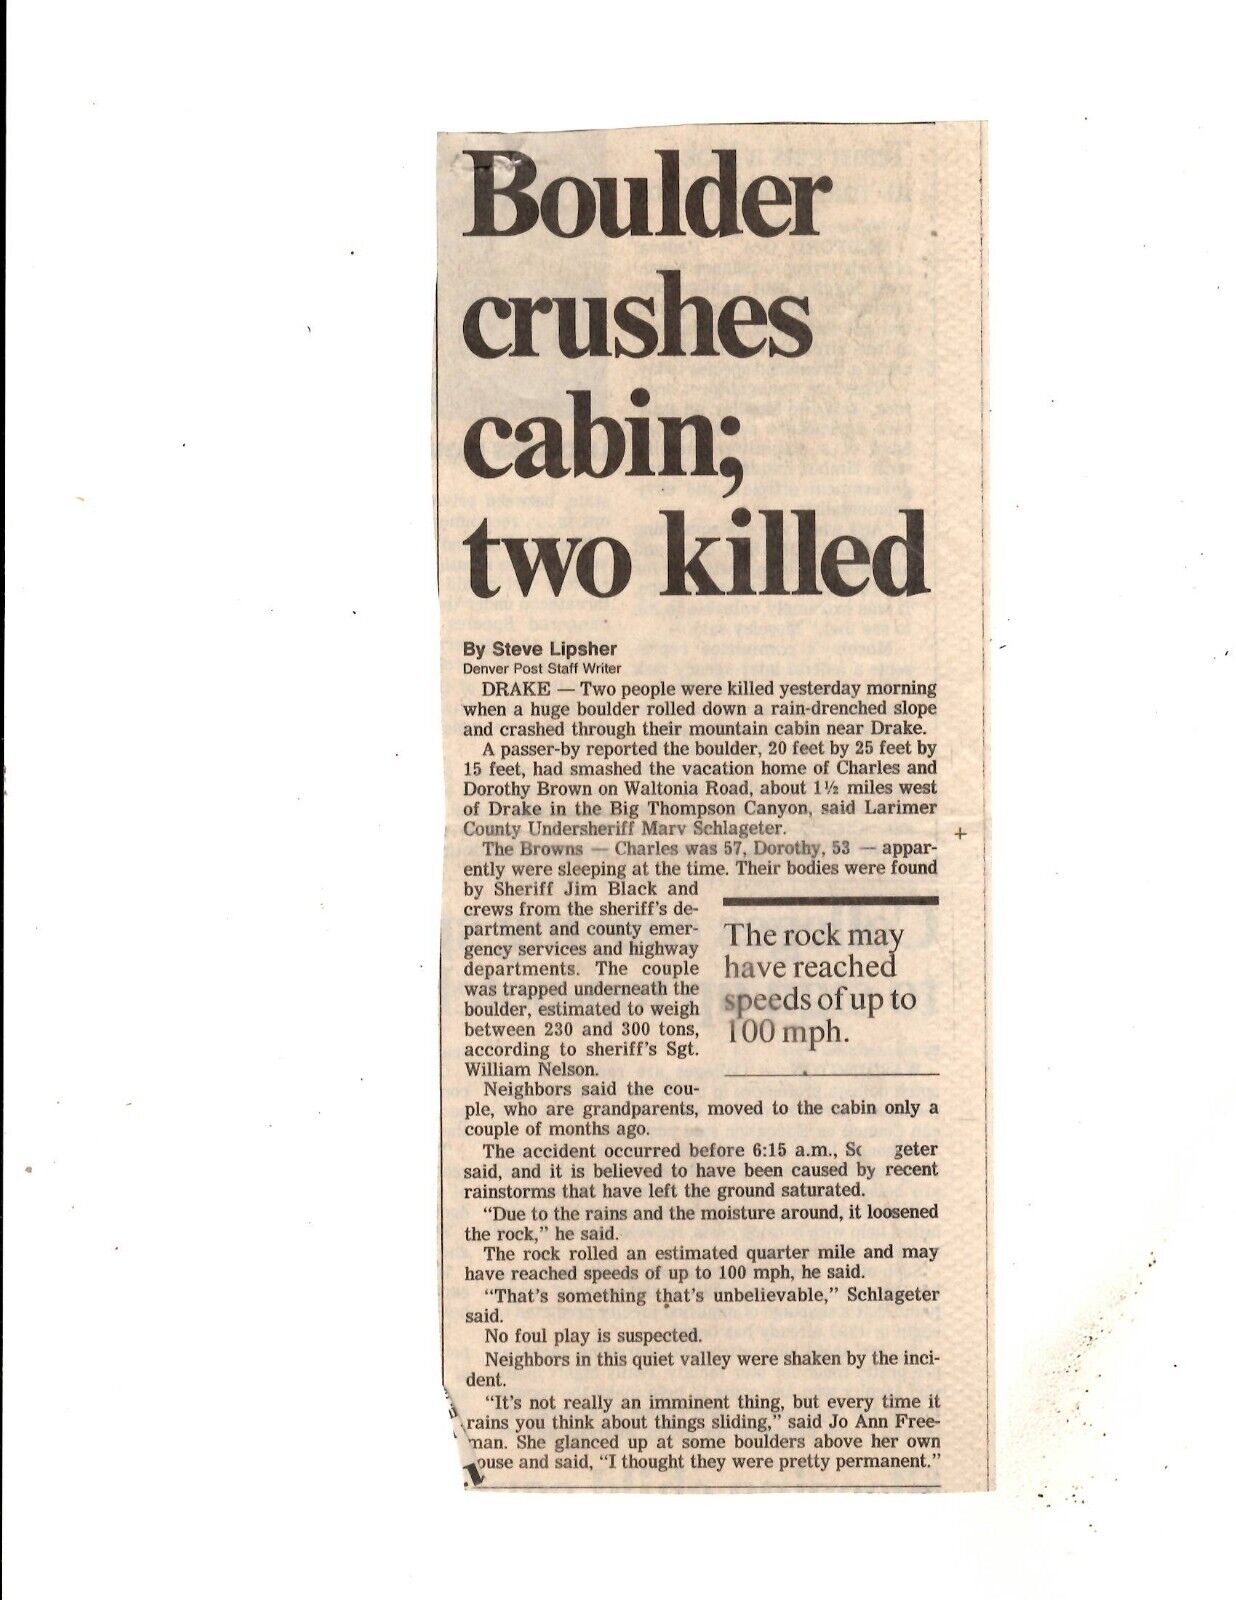 1990 Drake Colorado Newspaper Clippings Letter Boulder Crushes Cabin Two Killed